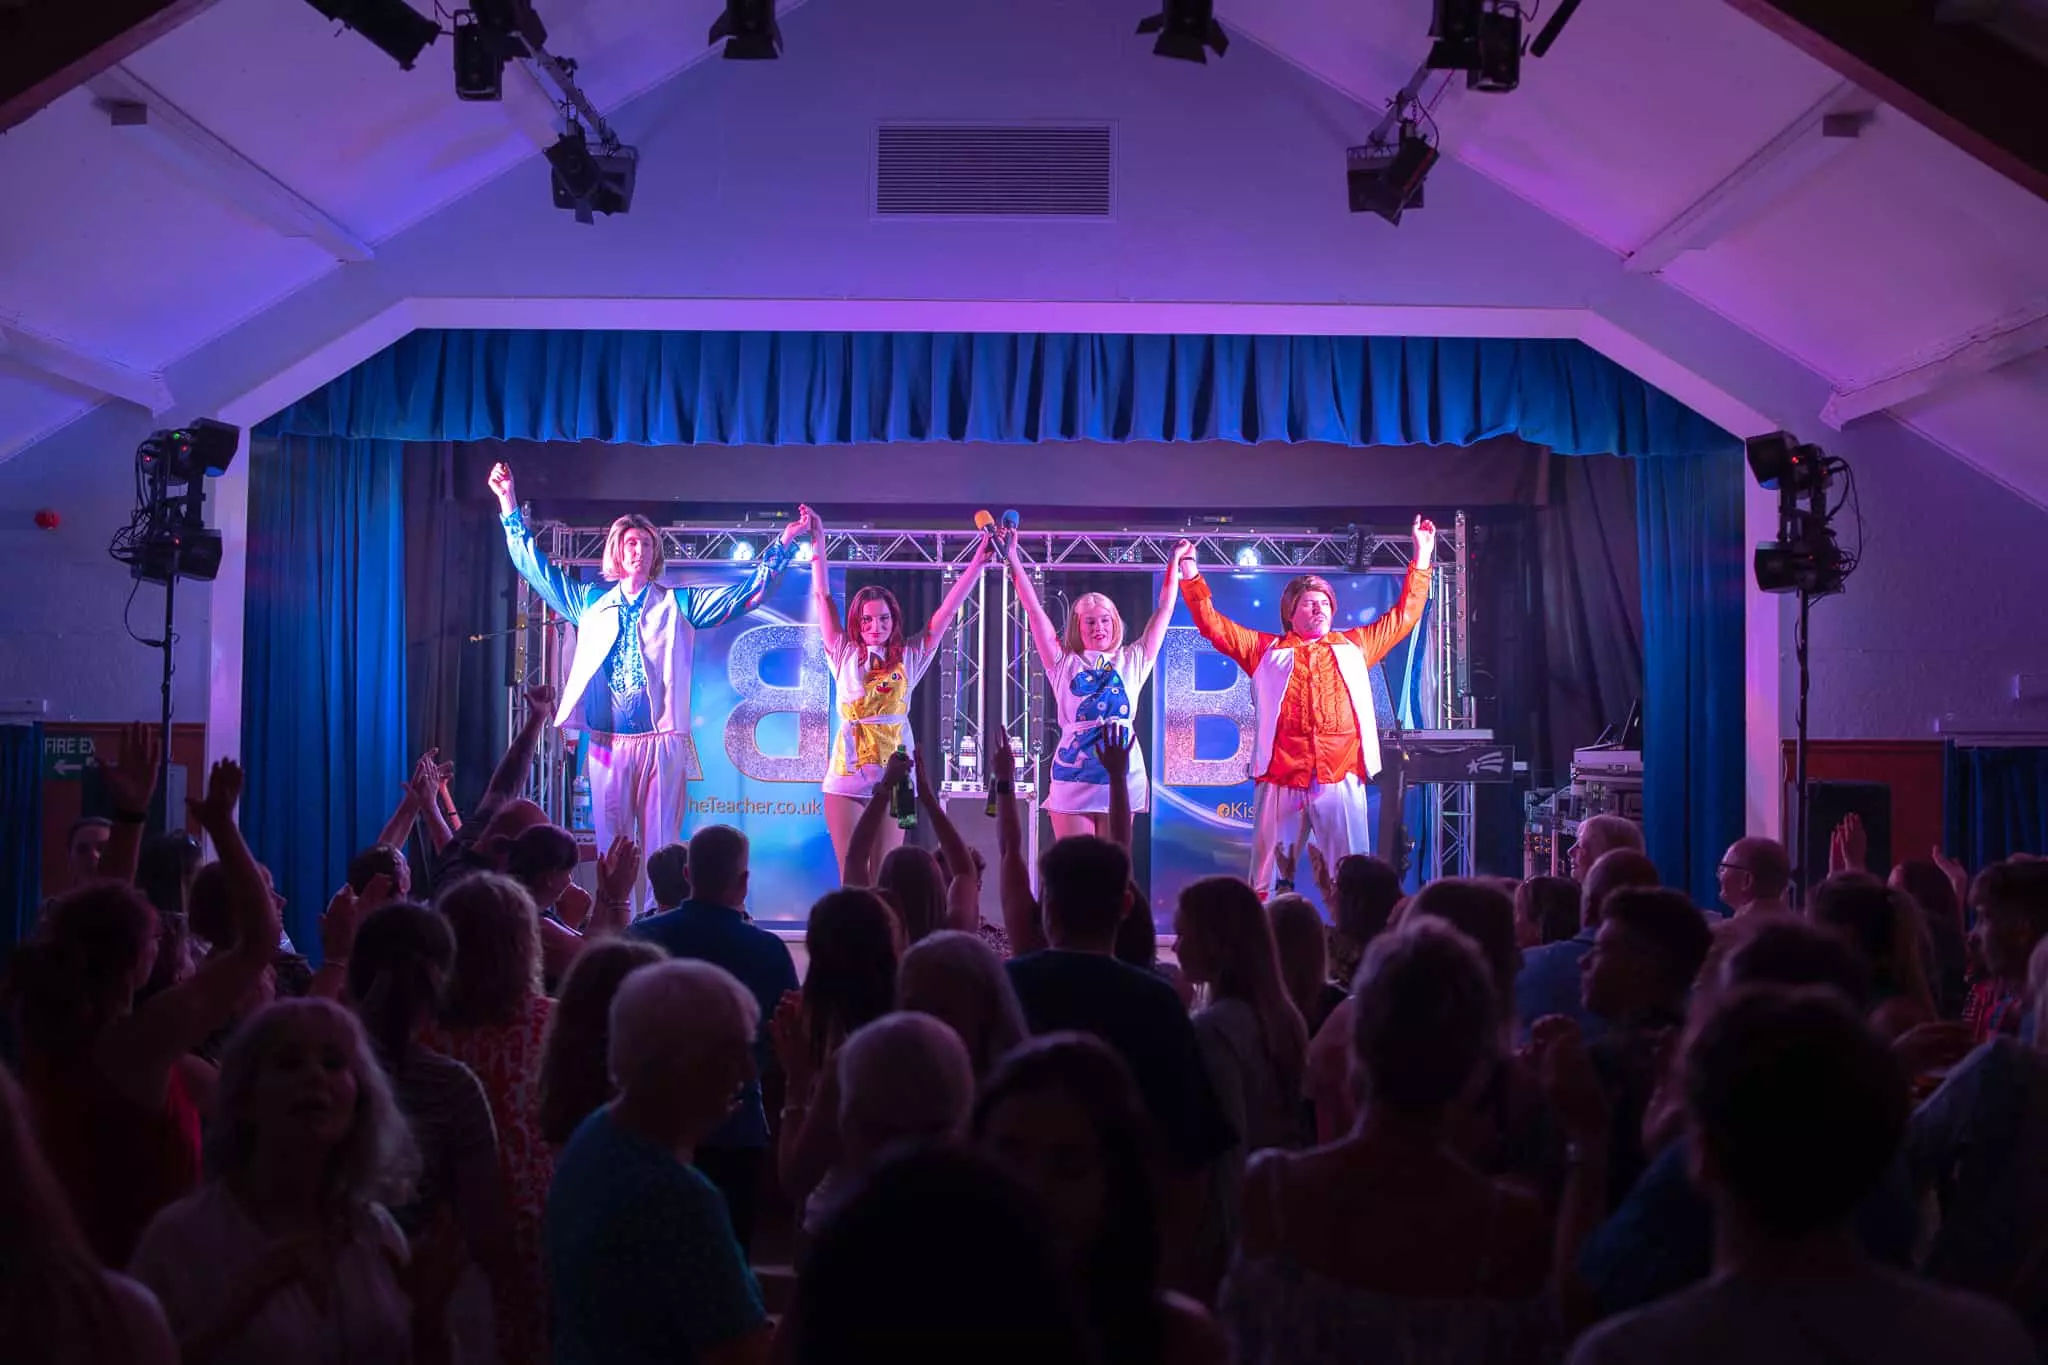 ABBA band Kiss the Teacher performing abba tributes across the uk